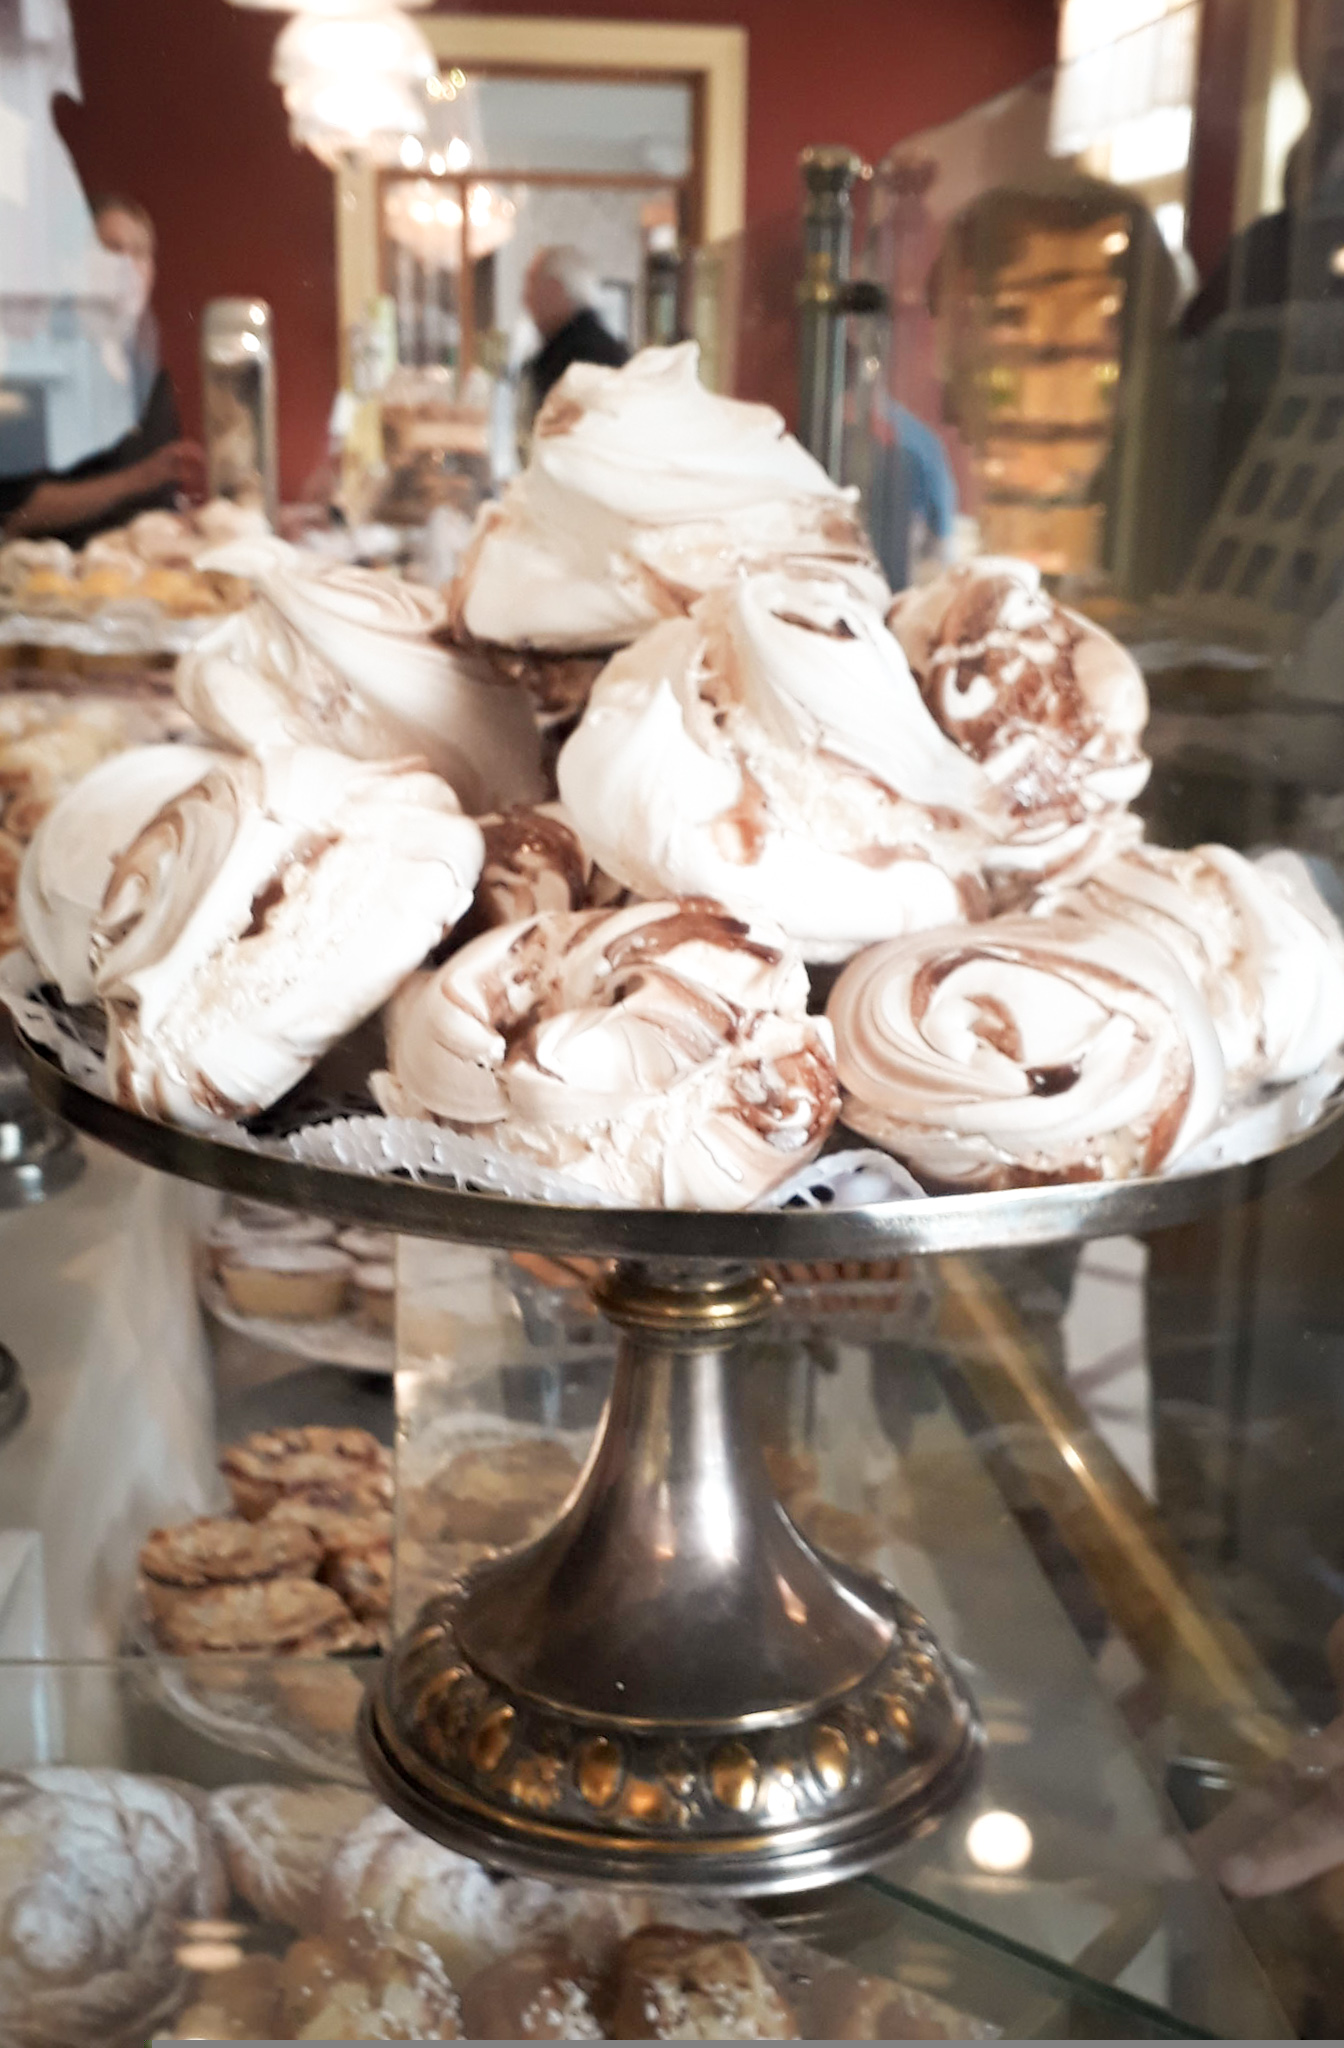 Said meringues which were among the many other delights I couldn't photograph un-selfconsciously (is that a word?)| Image: T. Thorne.